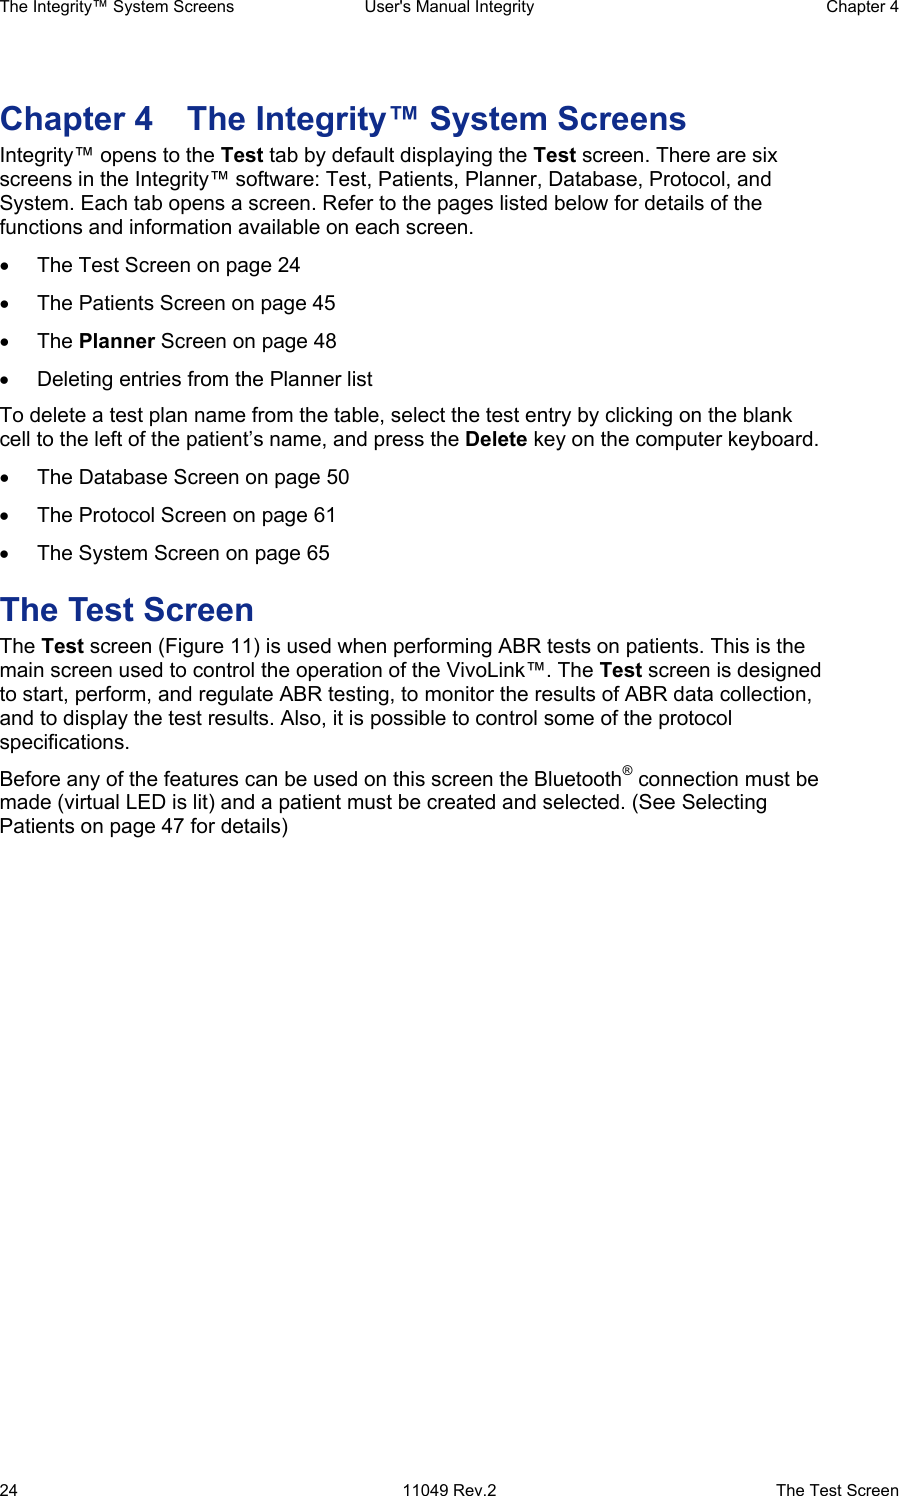 The Integrity™ System Screens  User&apos;s Manual Integrity  Chapter 4  24  11049 Rev.2  The Test Screen Chapter 4  The Integrity™ System Screens Integrity™ opens to the Test tab by default displaying the Test screen. There are six screens in the Integrity™ software: Test, Patients, Planner, Database, Protocol, and System. Each tab opens a screen. Refer to the pages listed below for details of the functions and information available on each screen. • The Test Screen on page 24 • The Patients Screen on page 45 • The Planner Screen on page 48 • Deleting entries from the Planner list To delete a test plan name from the table, select the test entry by clicking on the blank cell to the left of the patient’s name, and press the Delete key on the computer keyboard. •  The Database Screen on page 50 • The Protocol Screen on page 61 • The System Screen on page 65 The Test Screen The Test screen (Figure 11) is used when performing ABR tests on patients. This is the main screen used to control the operation of the VivoLink™. The Test screen is designed to start, perform, and regulate ABR testing, to monitor the results of ABR data collection, and to display the test results. Also, it is possible to control some of the protocol specifications.  Before any of the features can be used on this screen the Bluetooth® connection must be made (virtual LED is lit) and a patient must be created and selected. (See Selecting Patients on page 47 for details) 